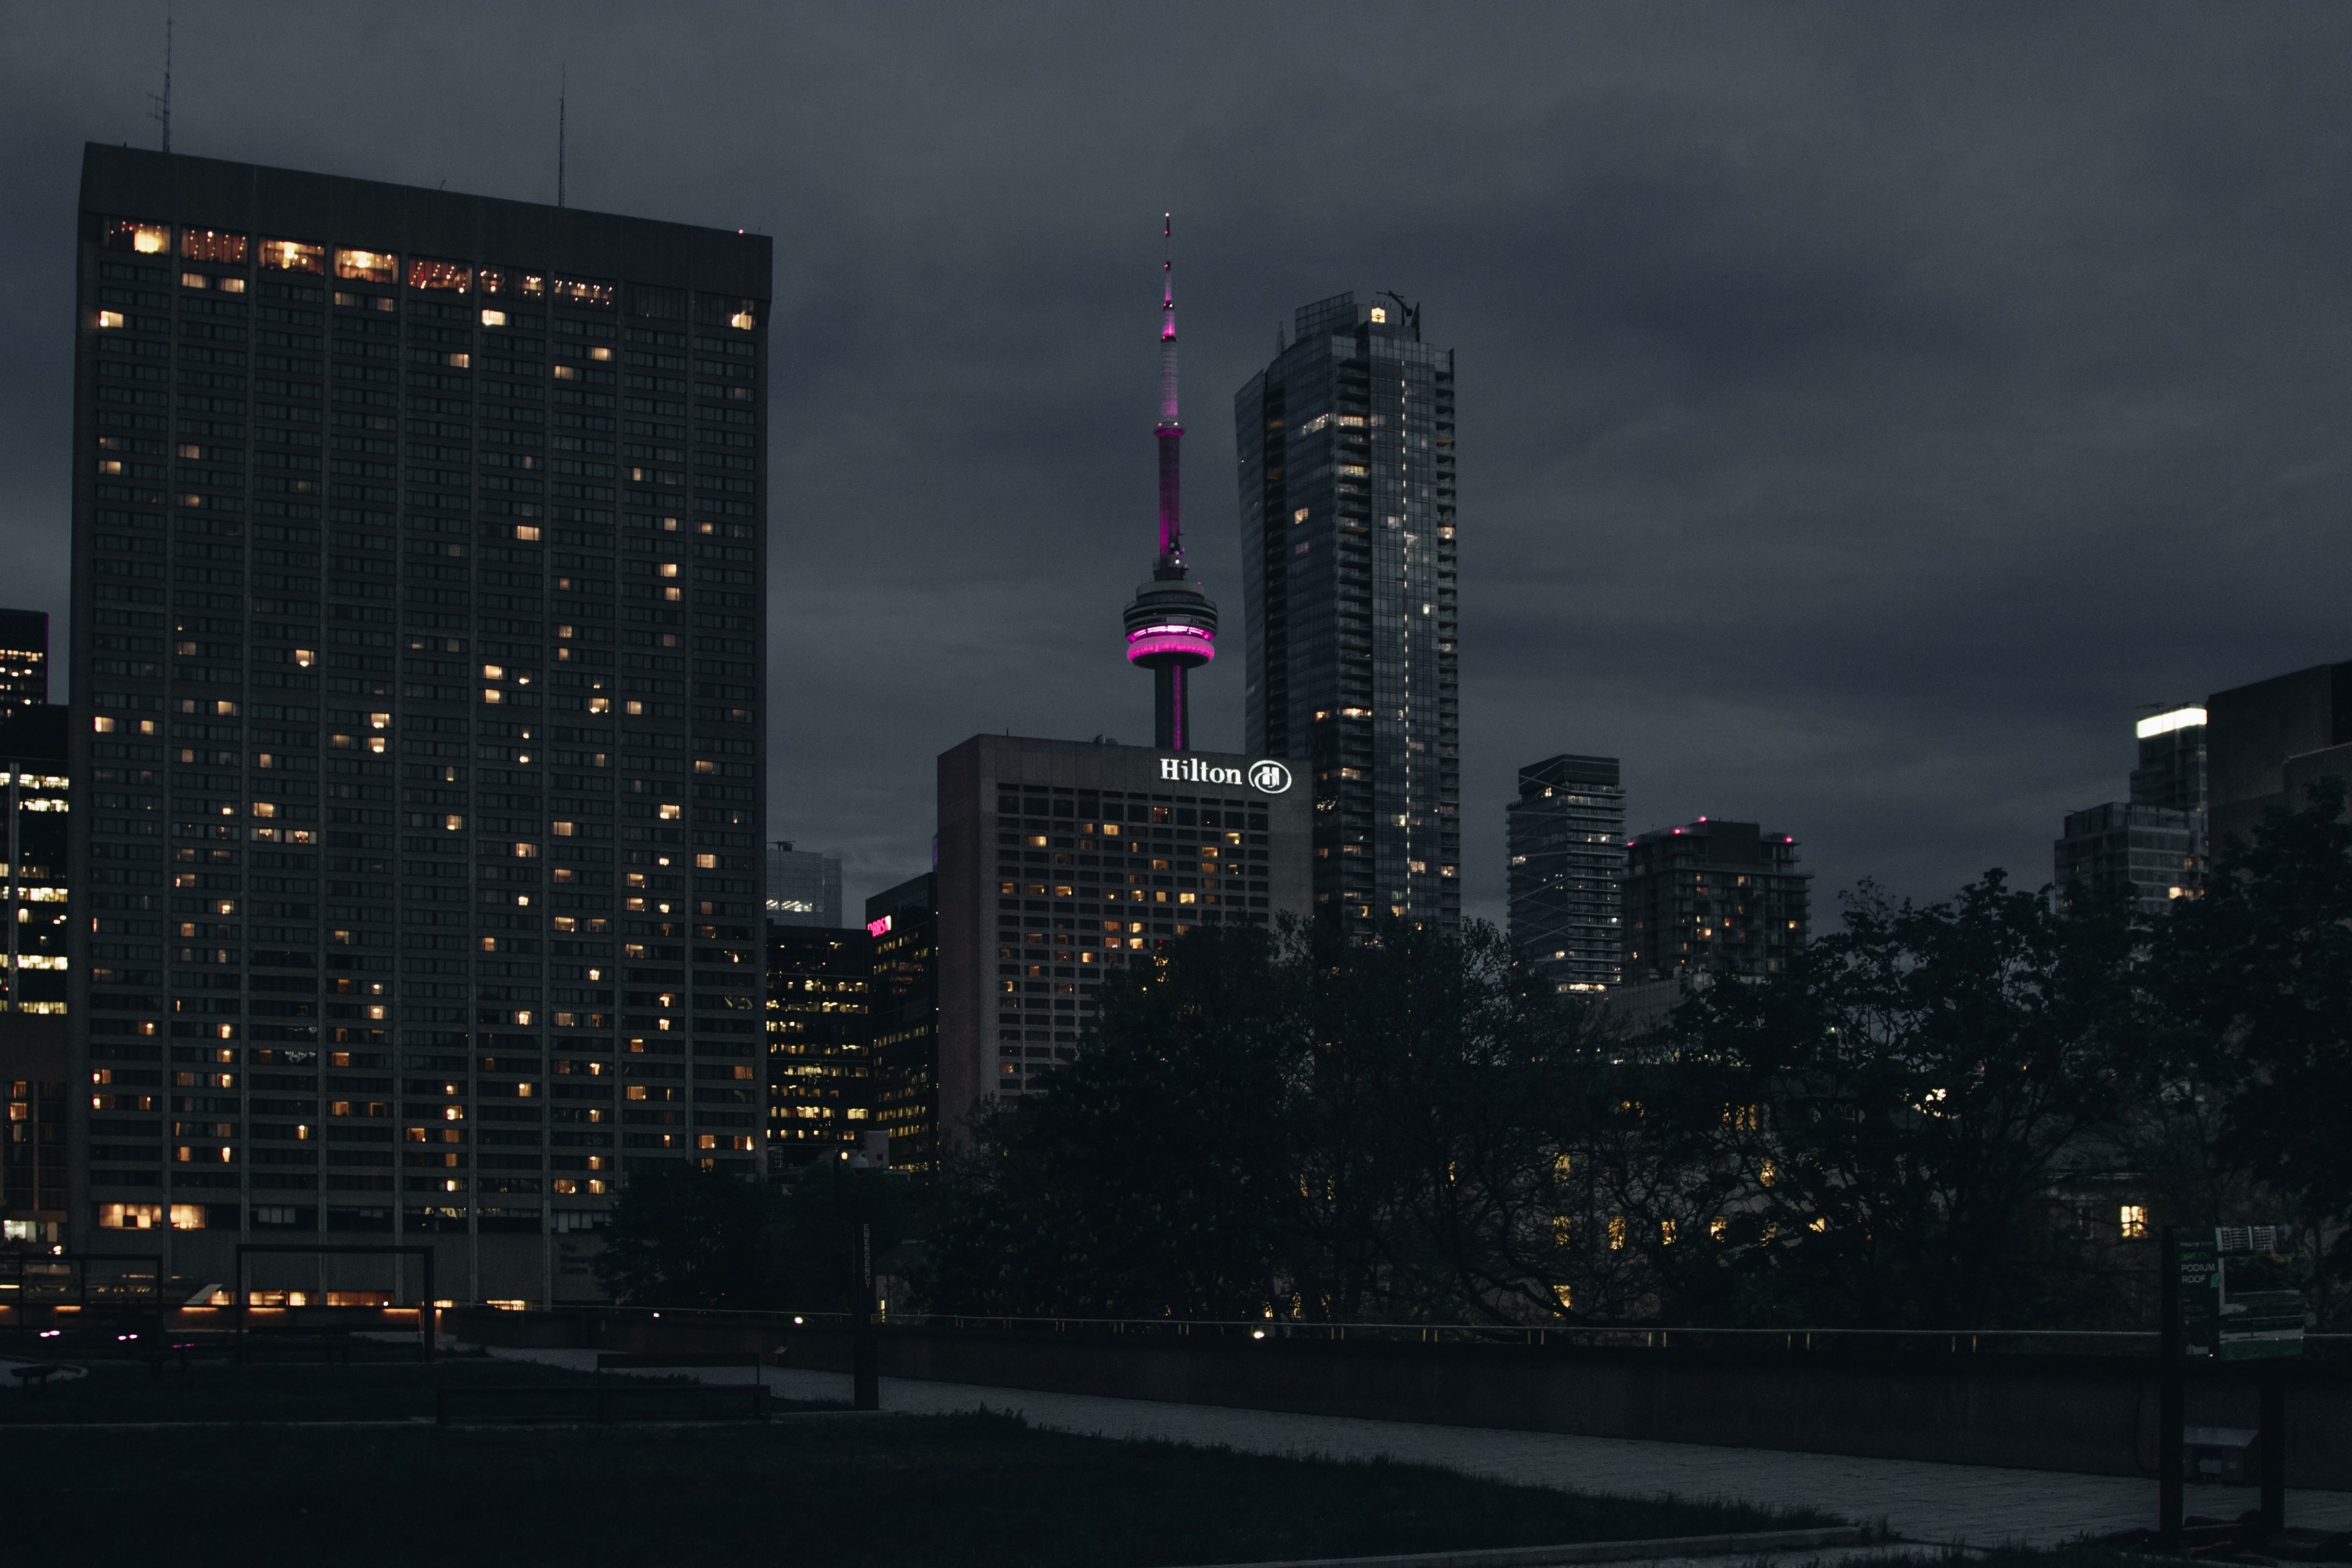 Wallpaper / a dim cityscape of toronto with the cn tower lit up in purple, toronto night cityscape 4k wallpaper free download